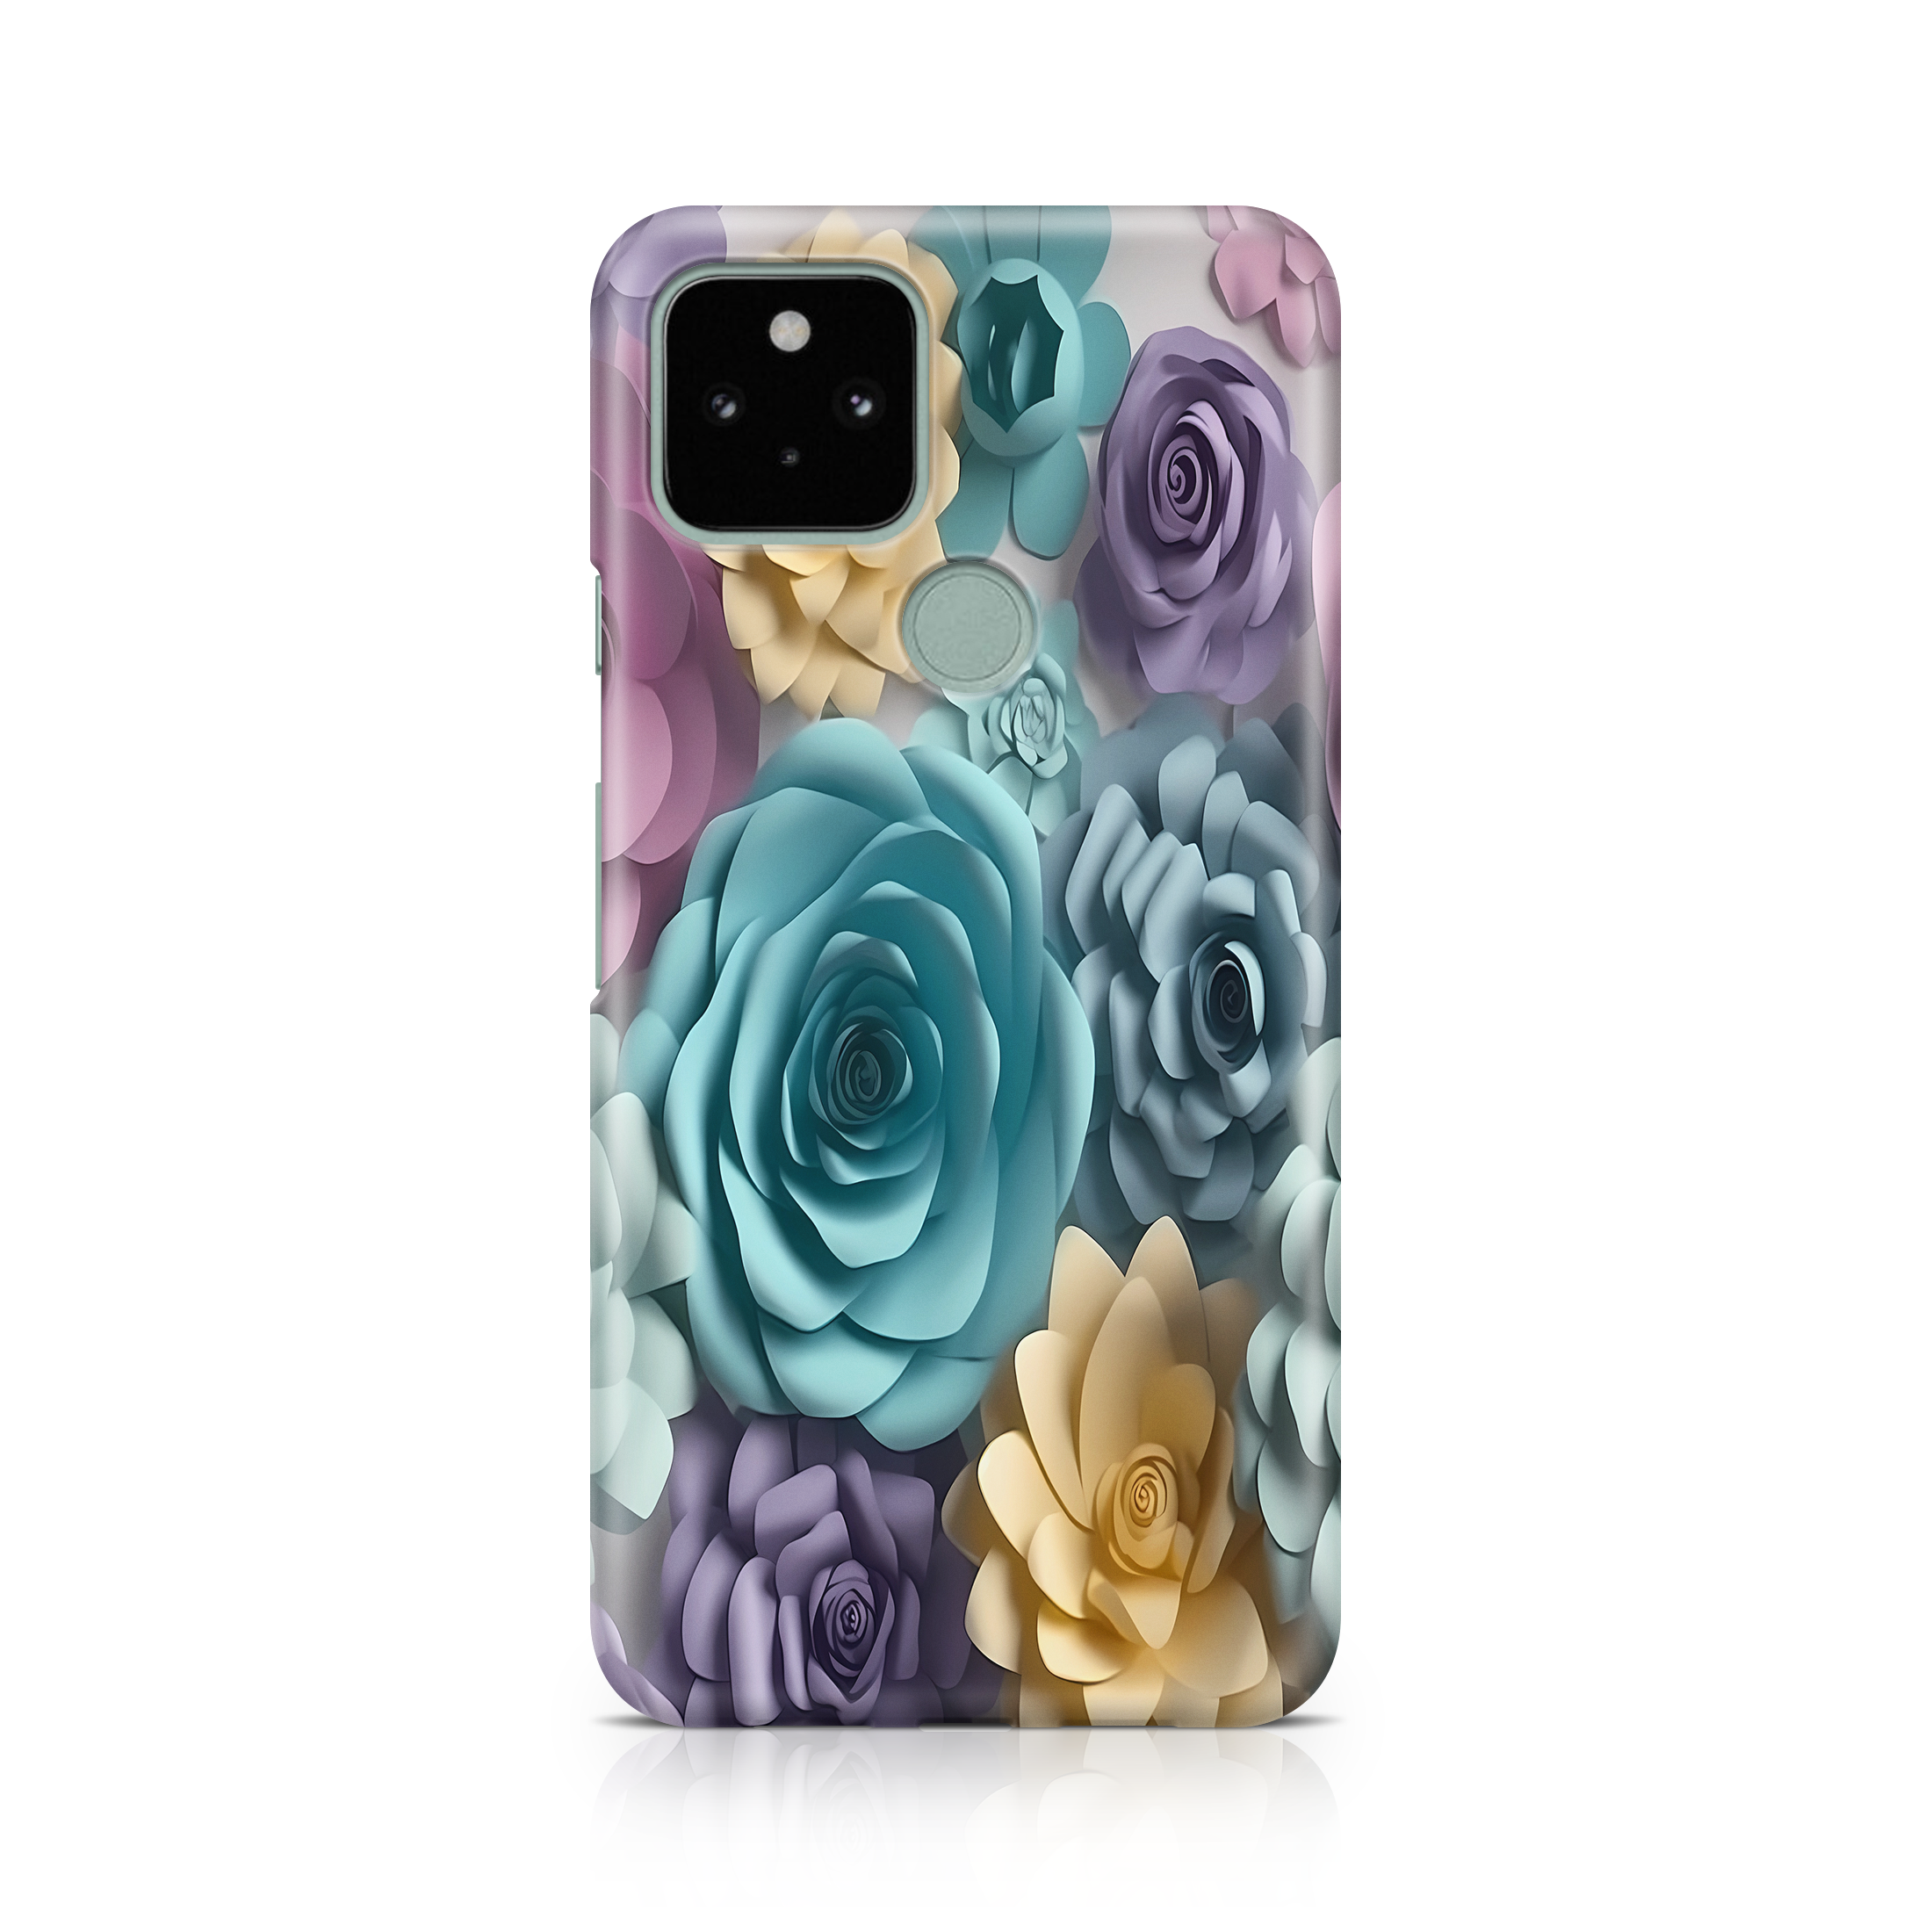 Harmony Blooms - Google phone case designs by CaseSwagger